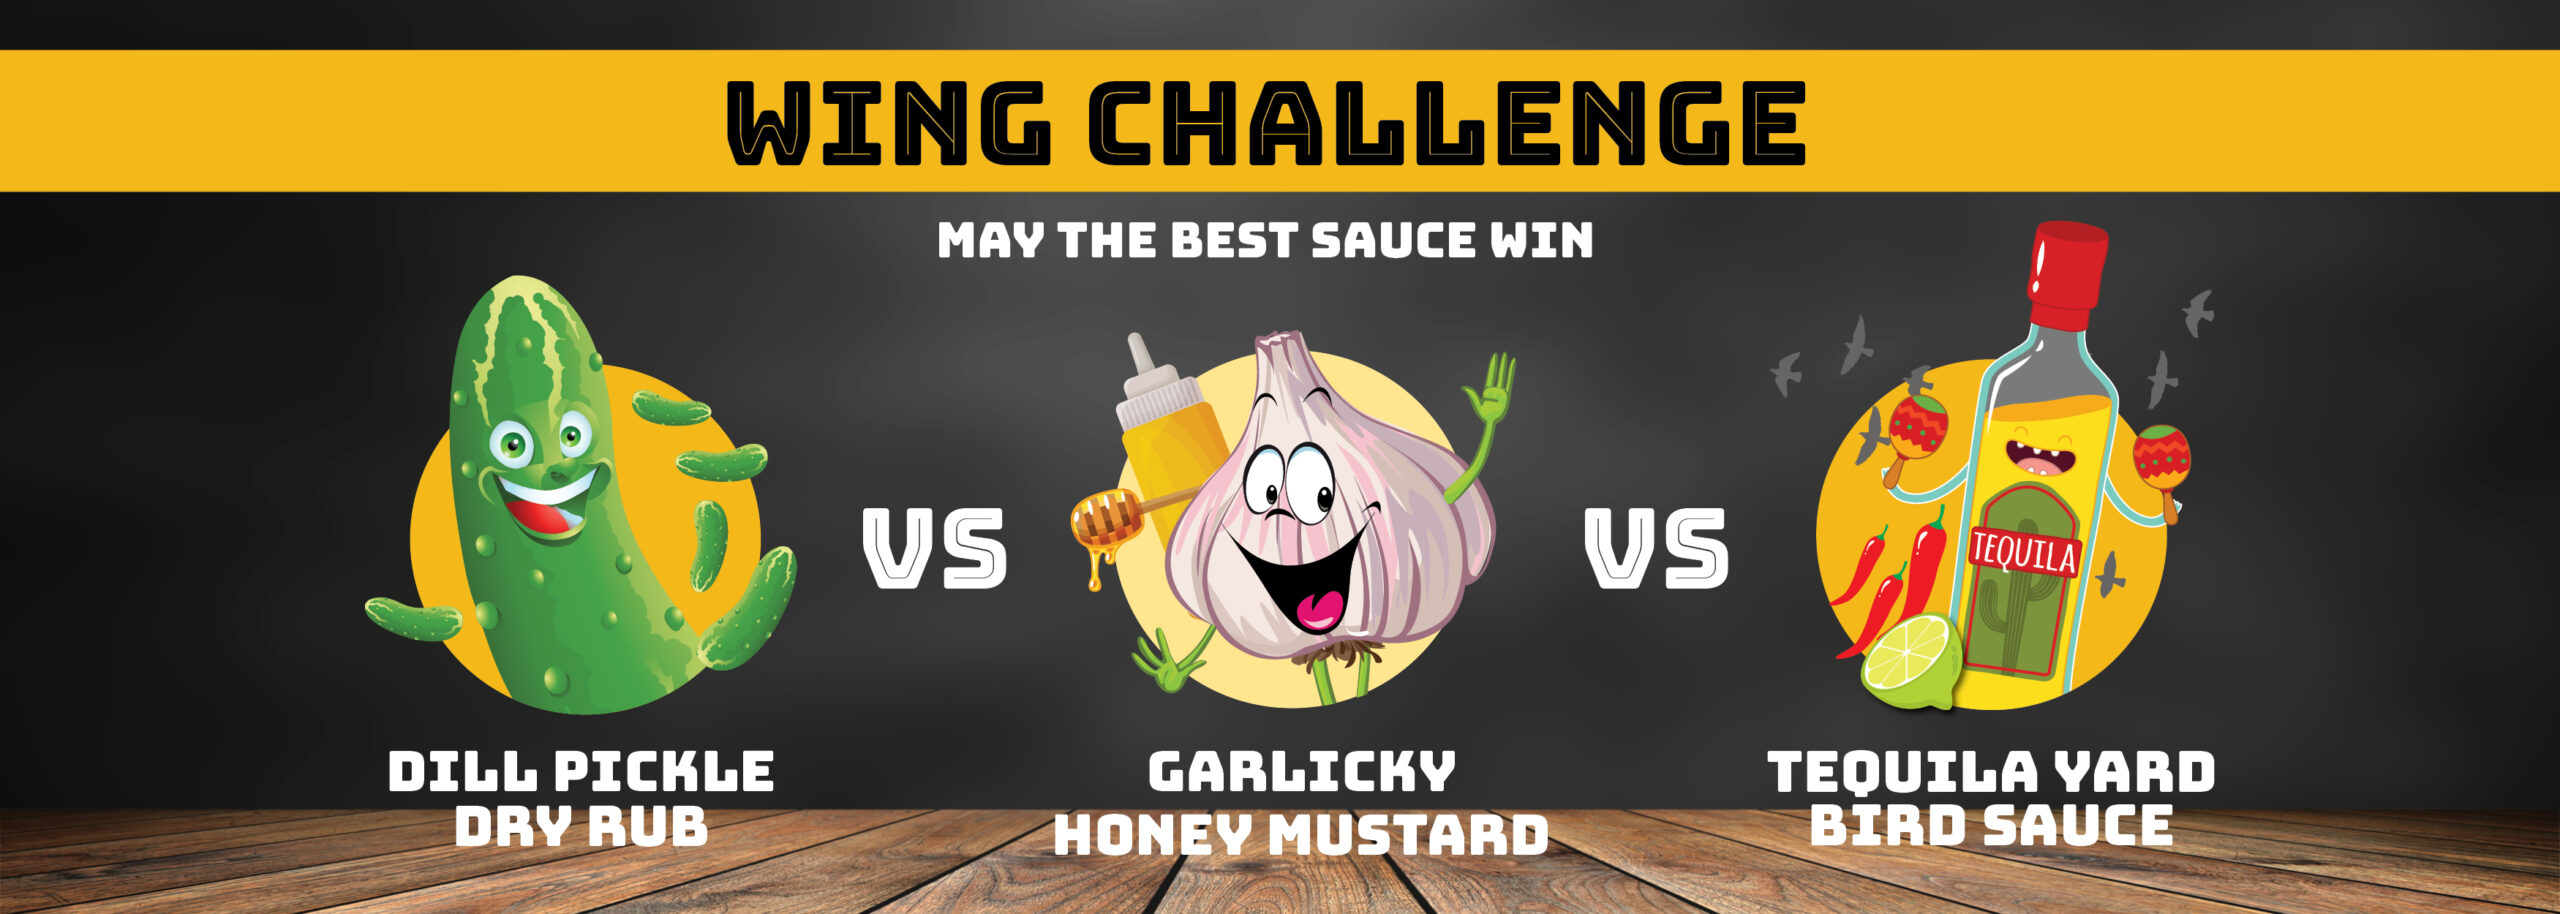 Wing challenge graphic with sauce choices